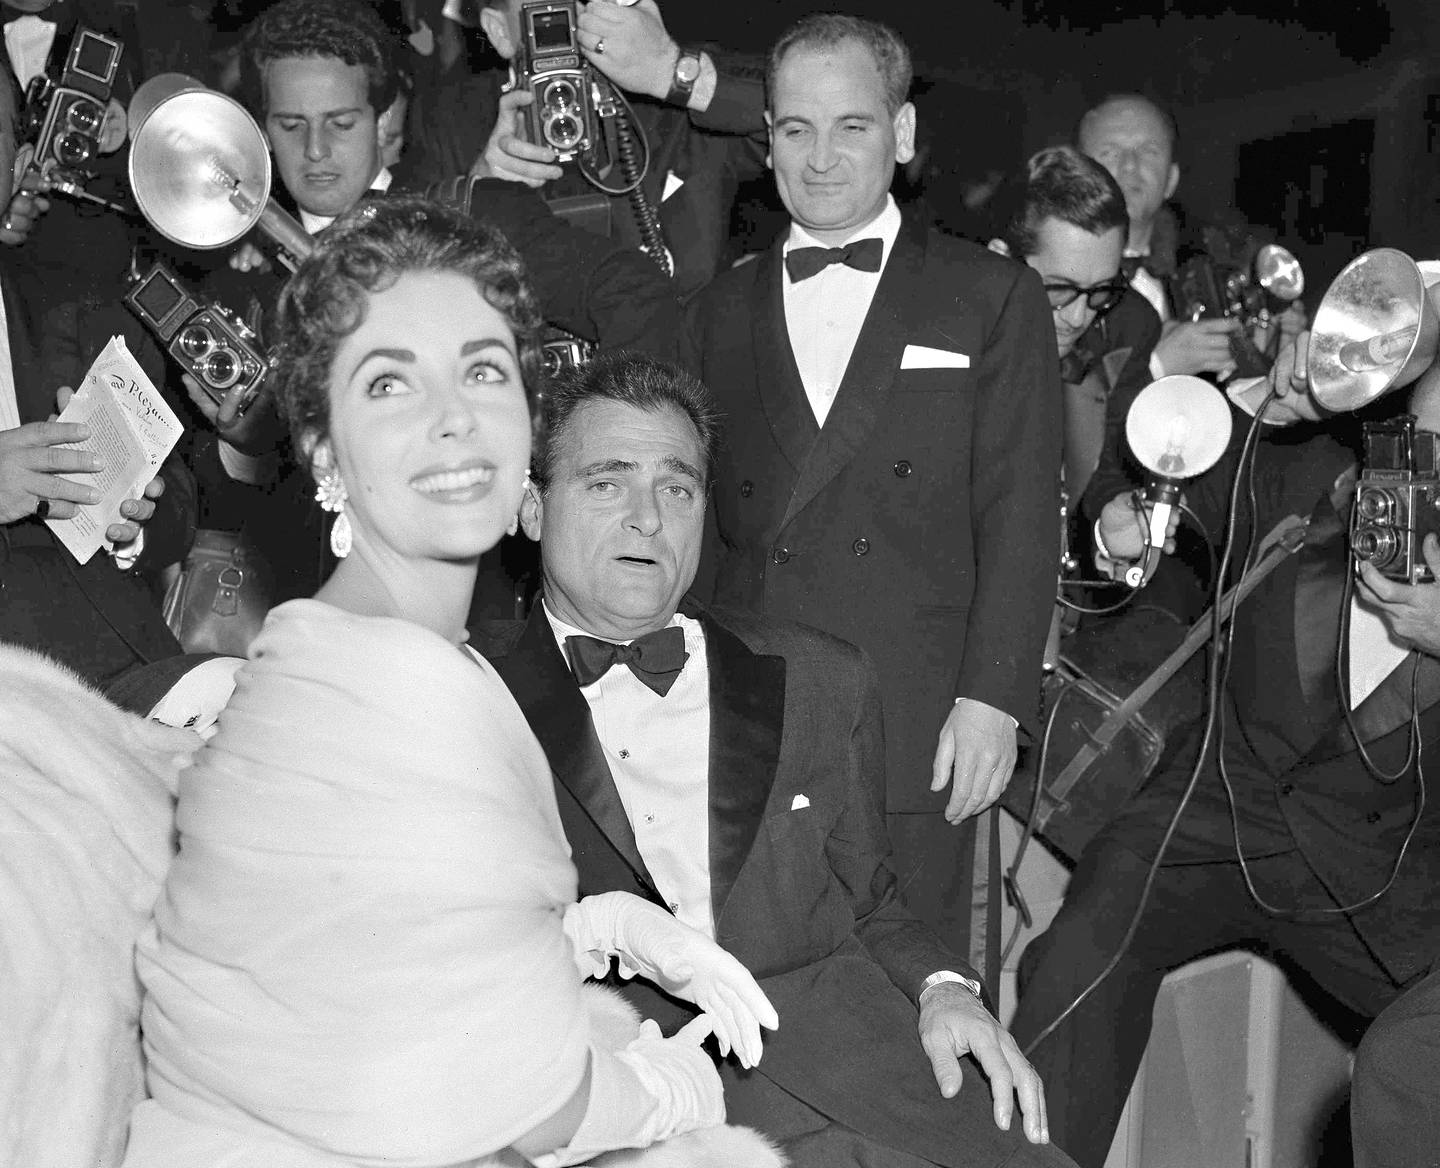 In this May 2, 1955 file photo film star Elizabeth Taylor and her husband, producer Mike Todd are surrounded by photographers at the Cannes Film Festival in Cannes. It is one of the indelible moments the Cannes Film Festival has created throughout its history, and more were likely to be made when it opened on Tuesday, May 12, 2020. This year's festival has been postponed due to the coronavirus pandemic. (AP Photo/Babout, File)